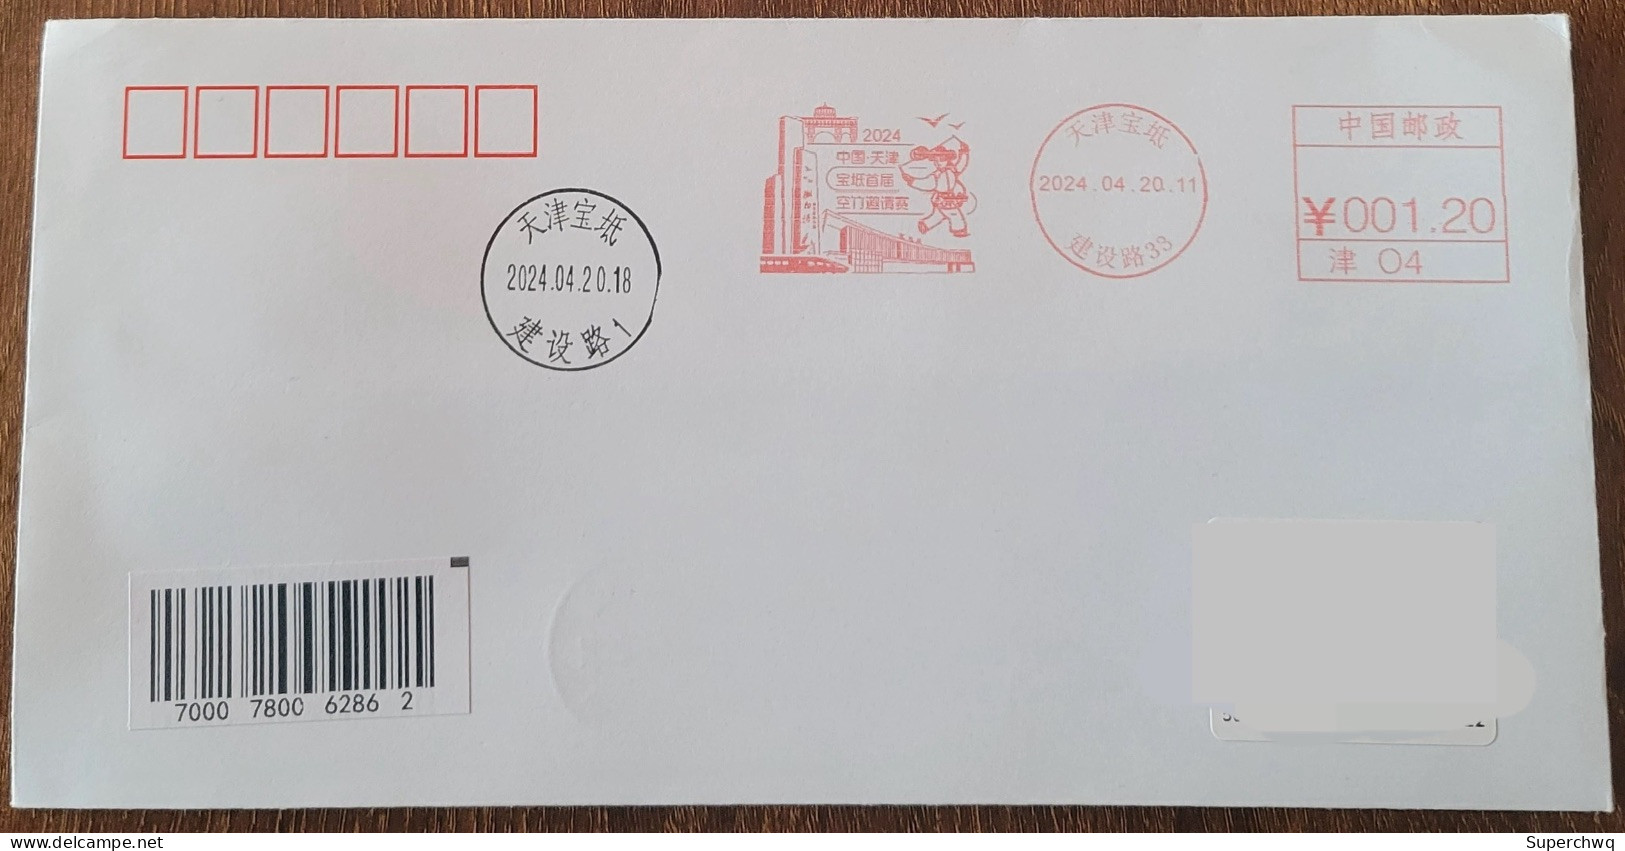 China Cover The First Tianjin Baodi Diabolo Invitational (Tianjin) Was Stamped With Postage On The First Day Of Actual D - Cartoline Postali